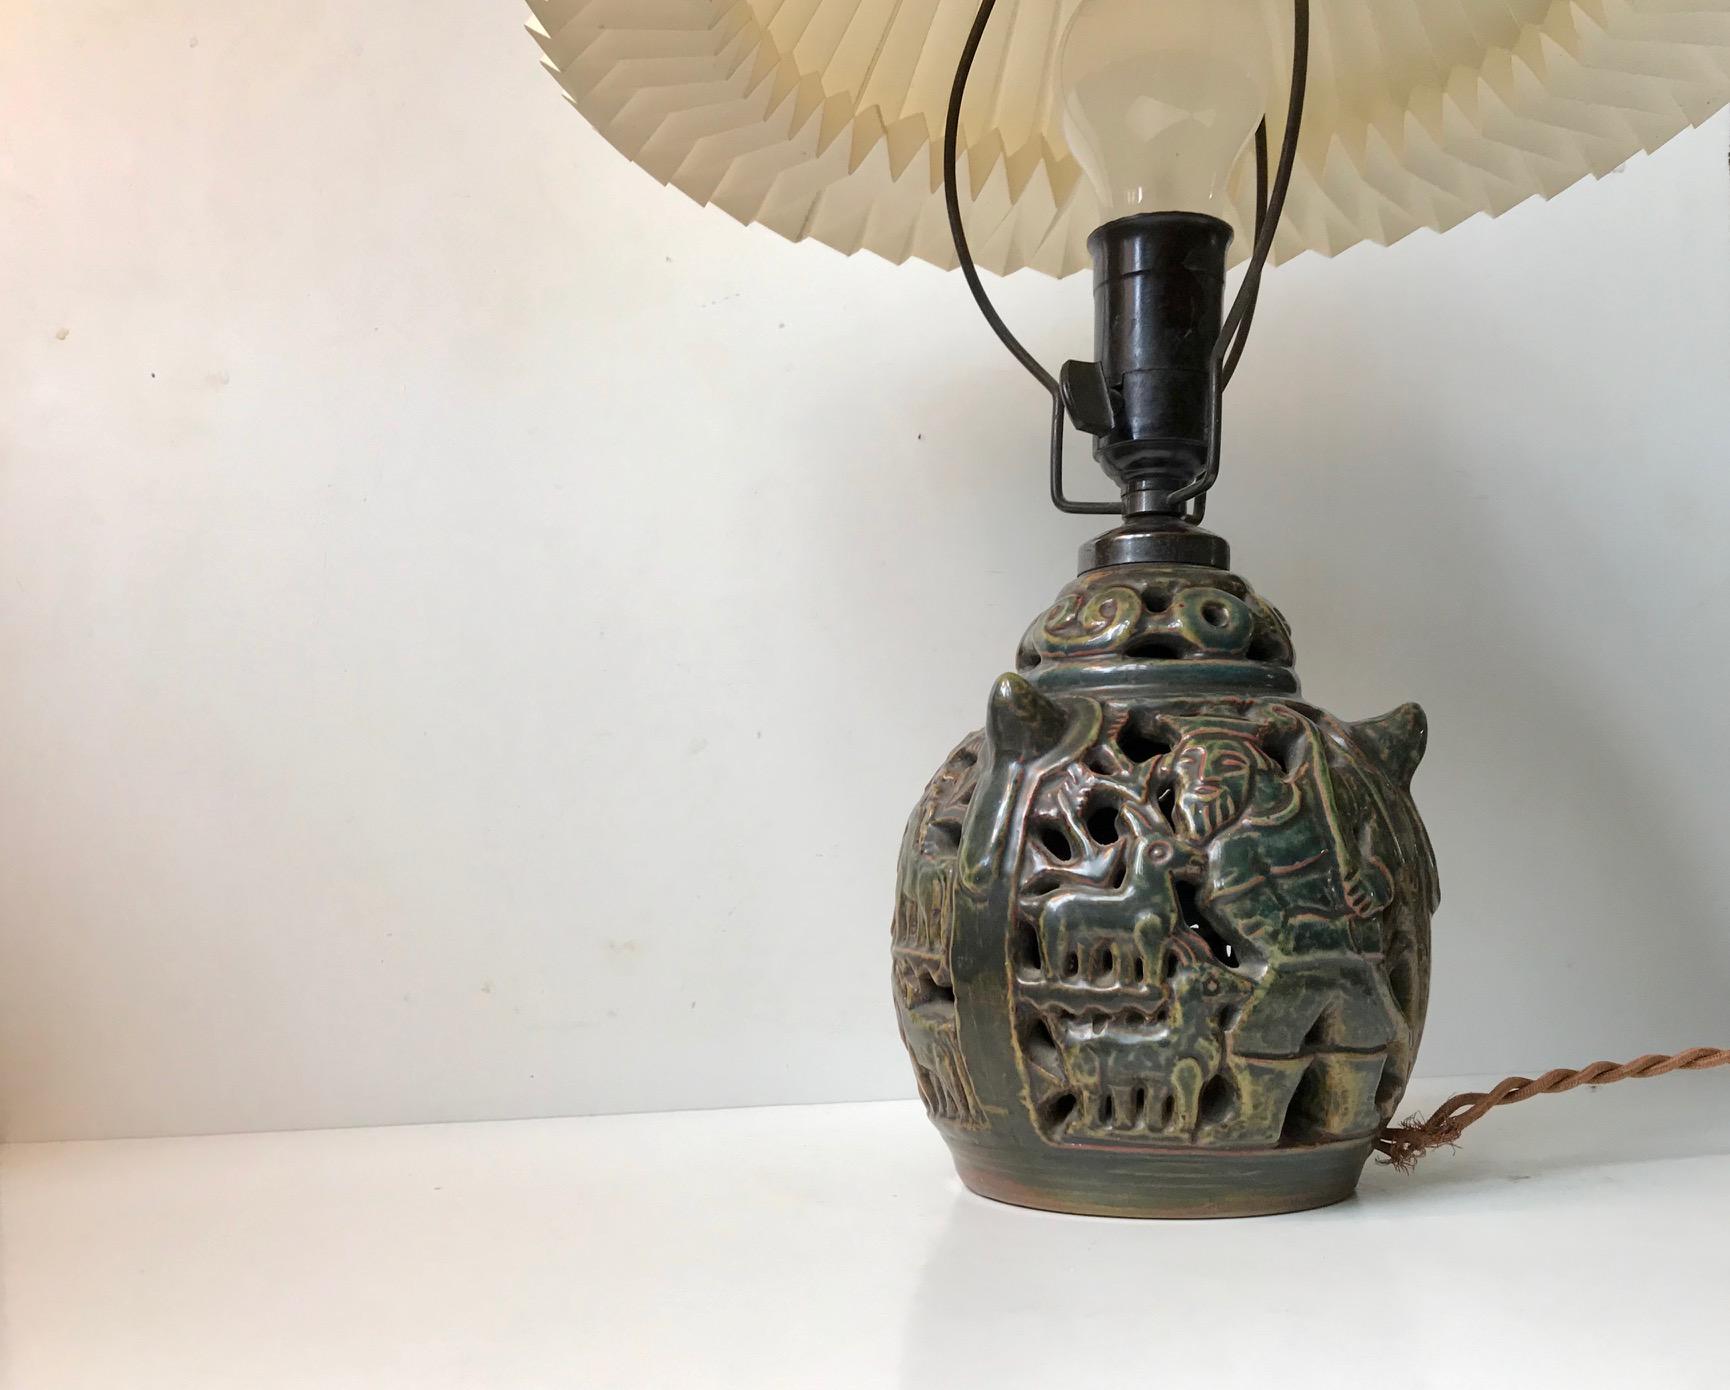 Lauritz Hjorth Ceramic Table Lamp with Hunting Motifs, 1920s For Sale 5